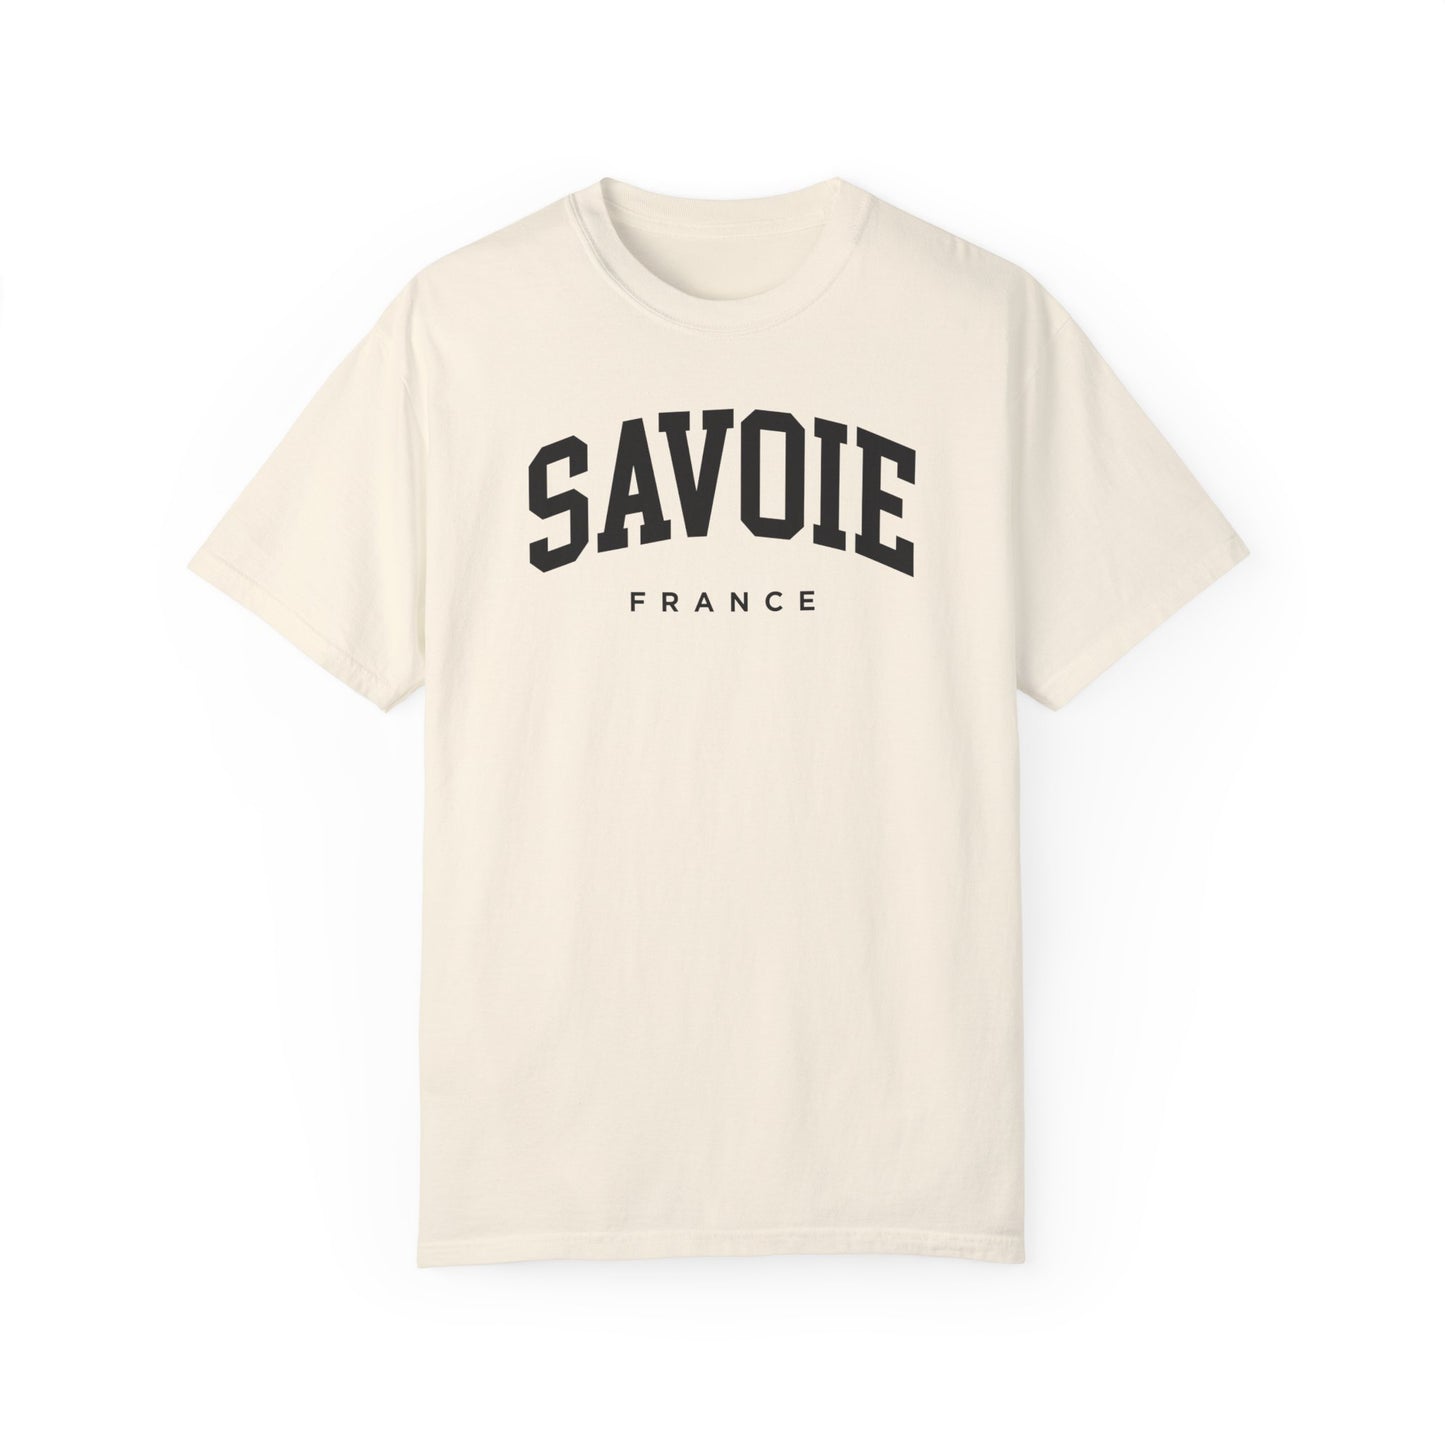 Savoy France Comfort Colors® Tee